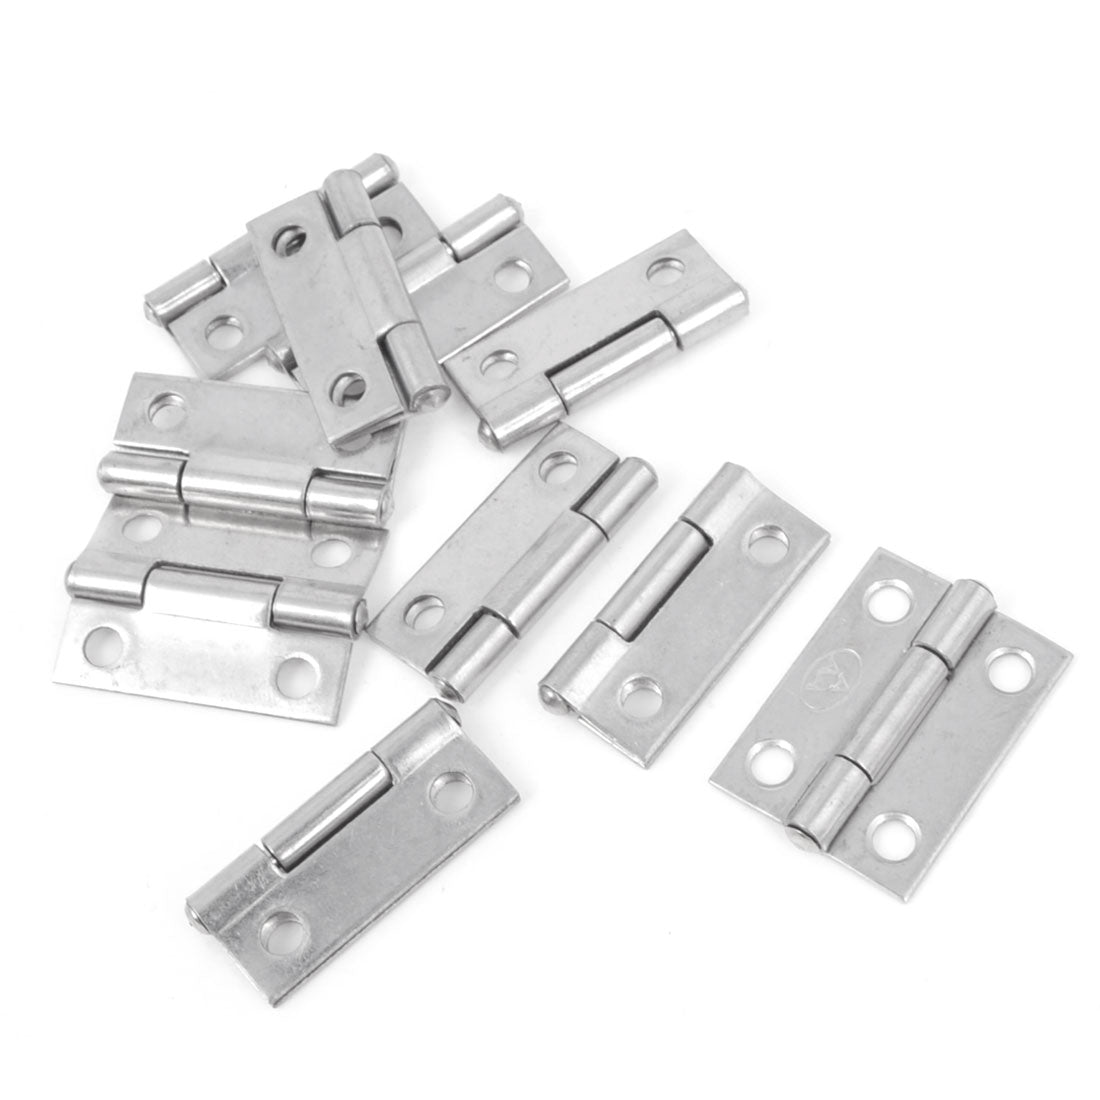 uxcell Uxcell 10 Pcs Silver Tone Stainless Steel Cabinet Door Hinges 1"